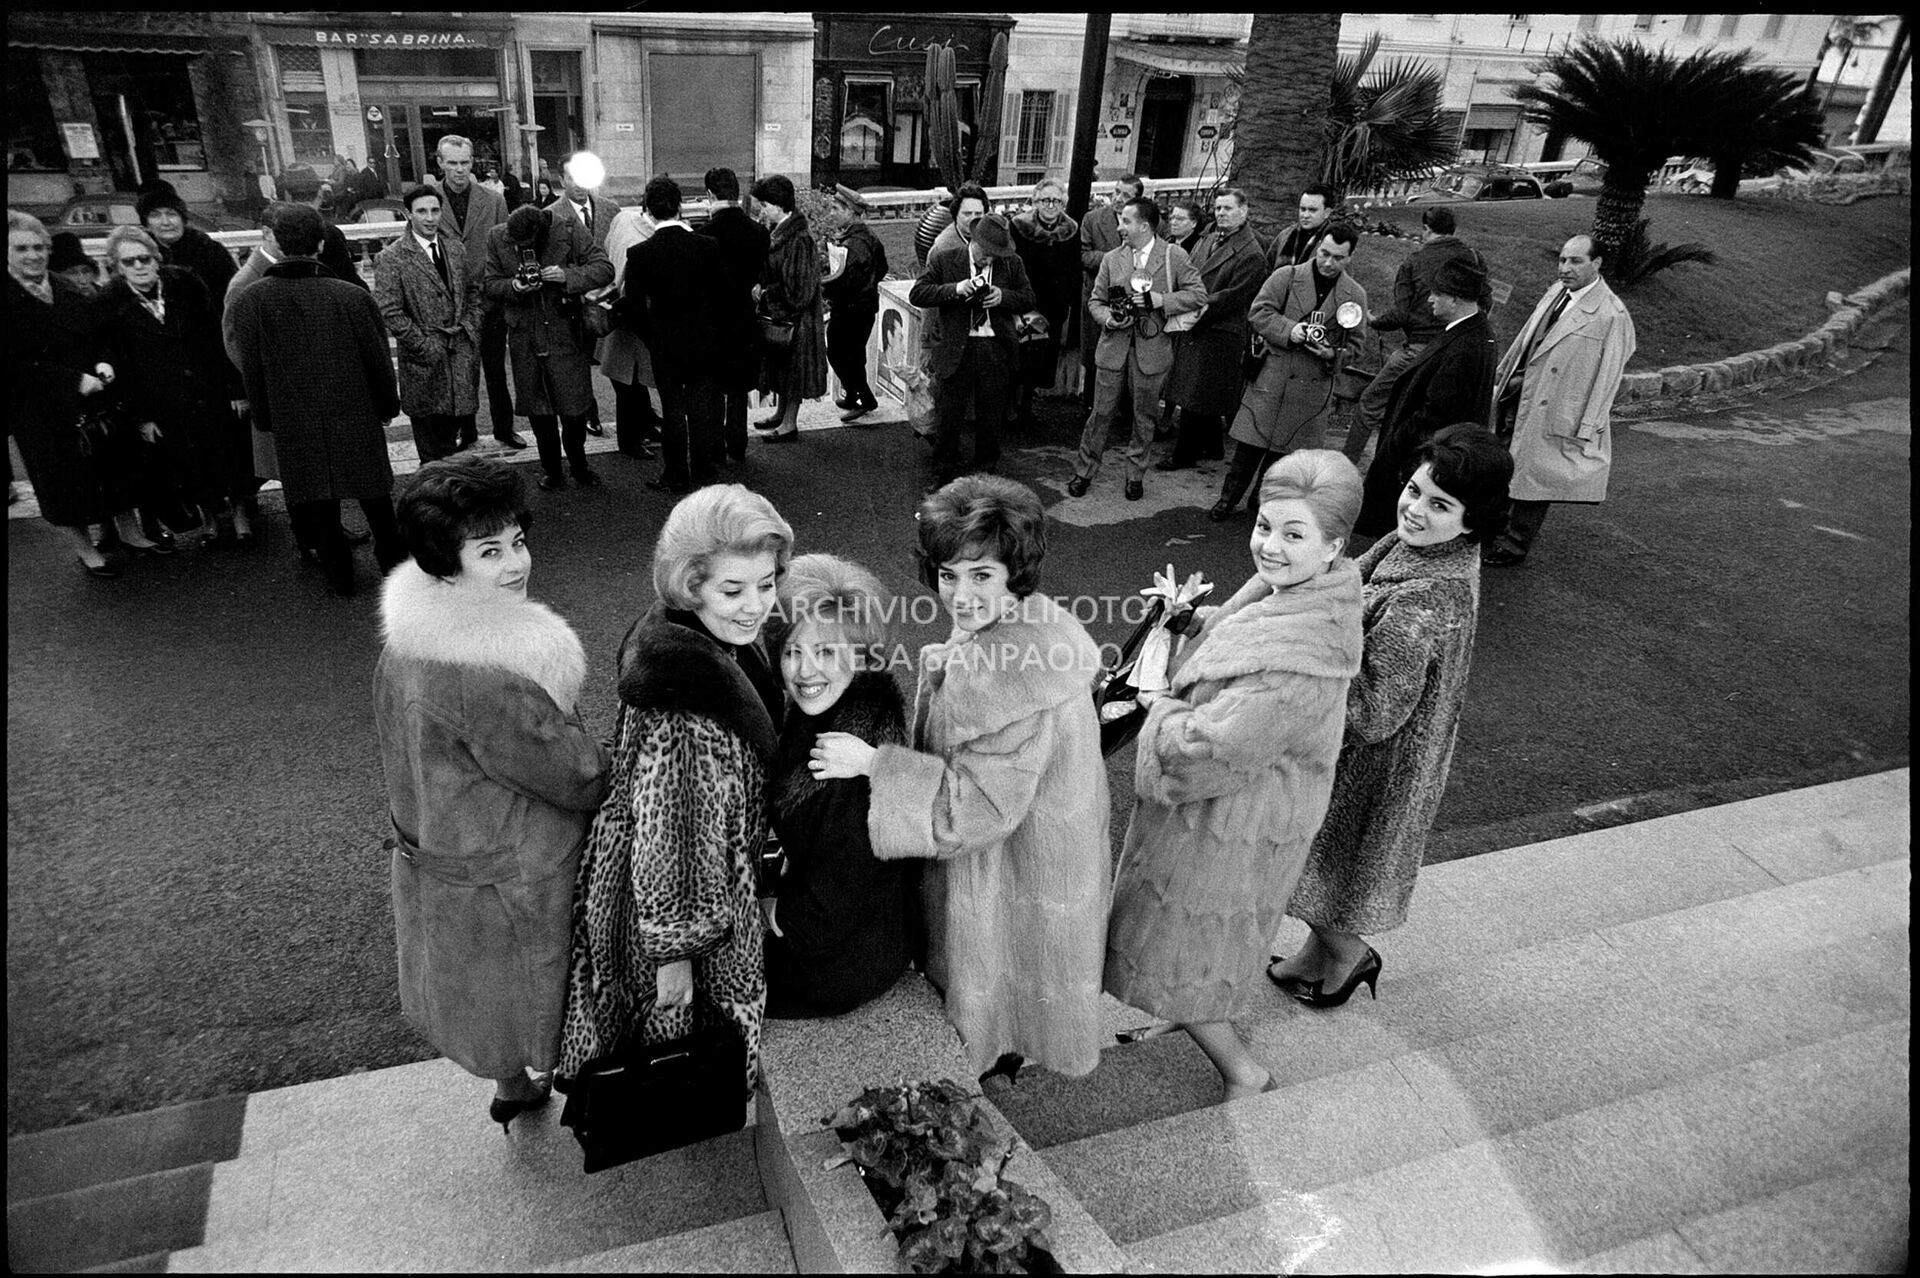 Group photo on the Casino steps during the 11th Sanremo Festival: from left Nadia Liani, Wilma De Angelis, Betty Curtis, Jolanda Rossin, Silvia Guidi and Cocky Mazzetti